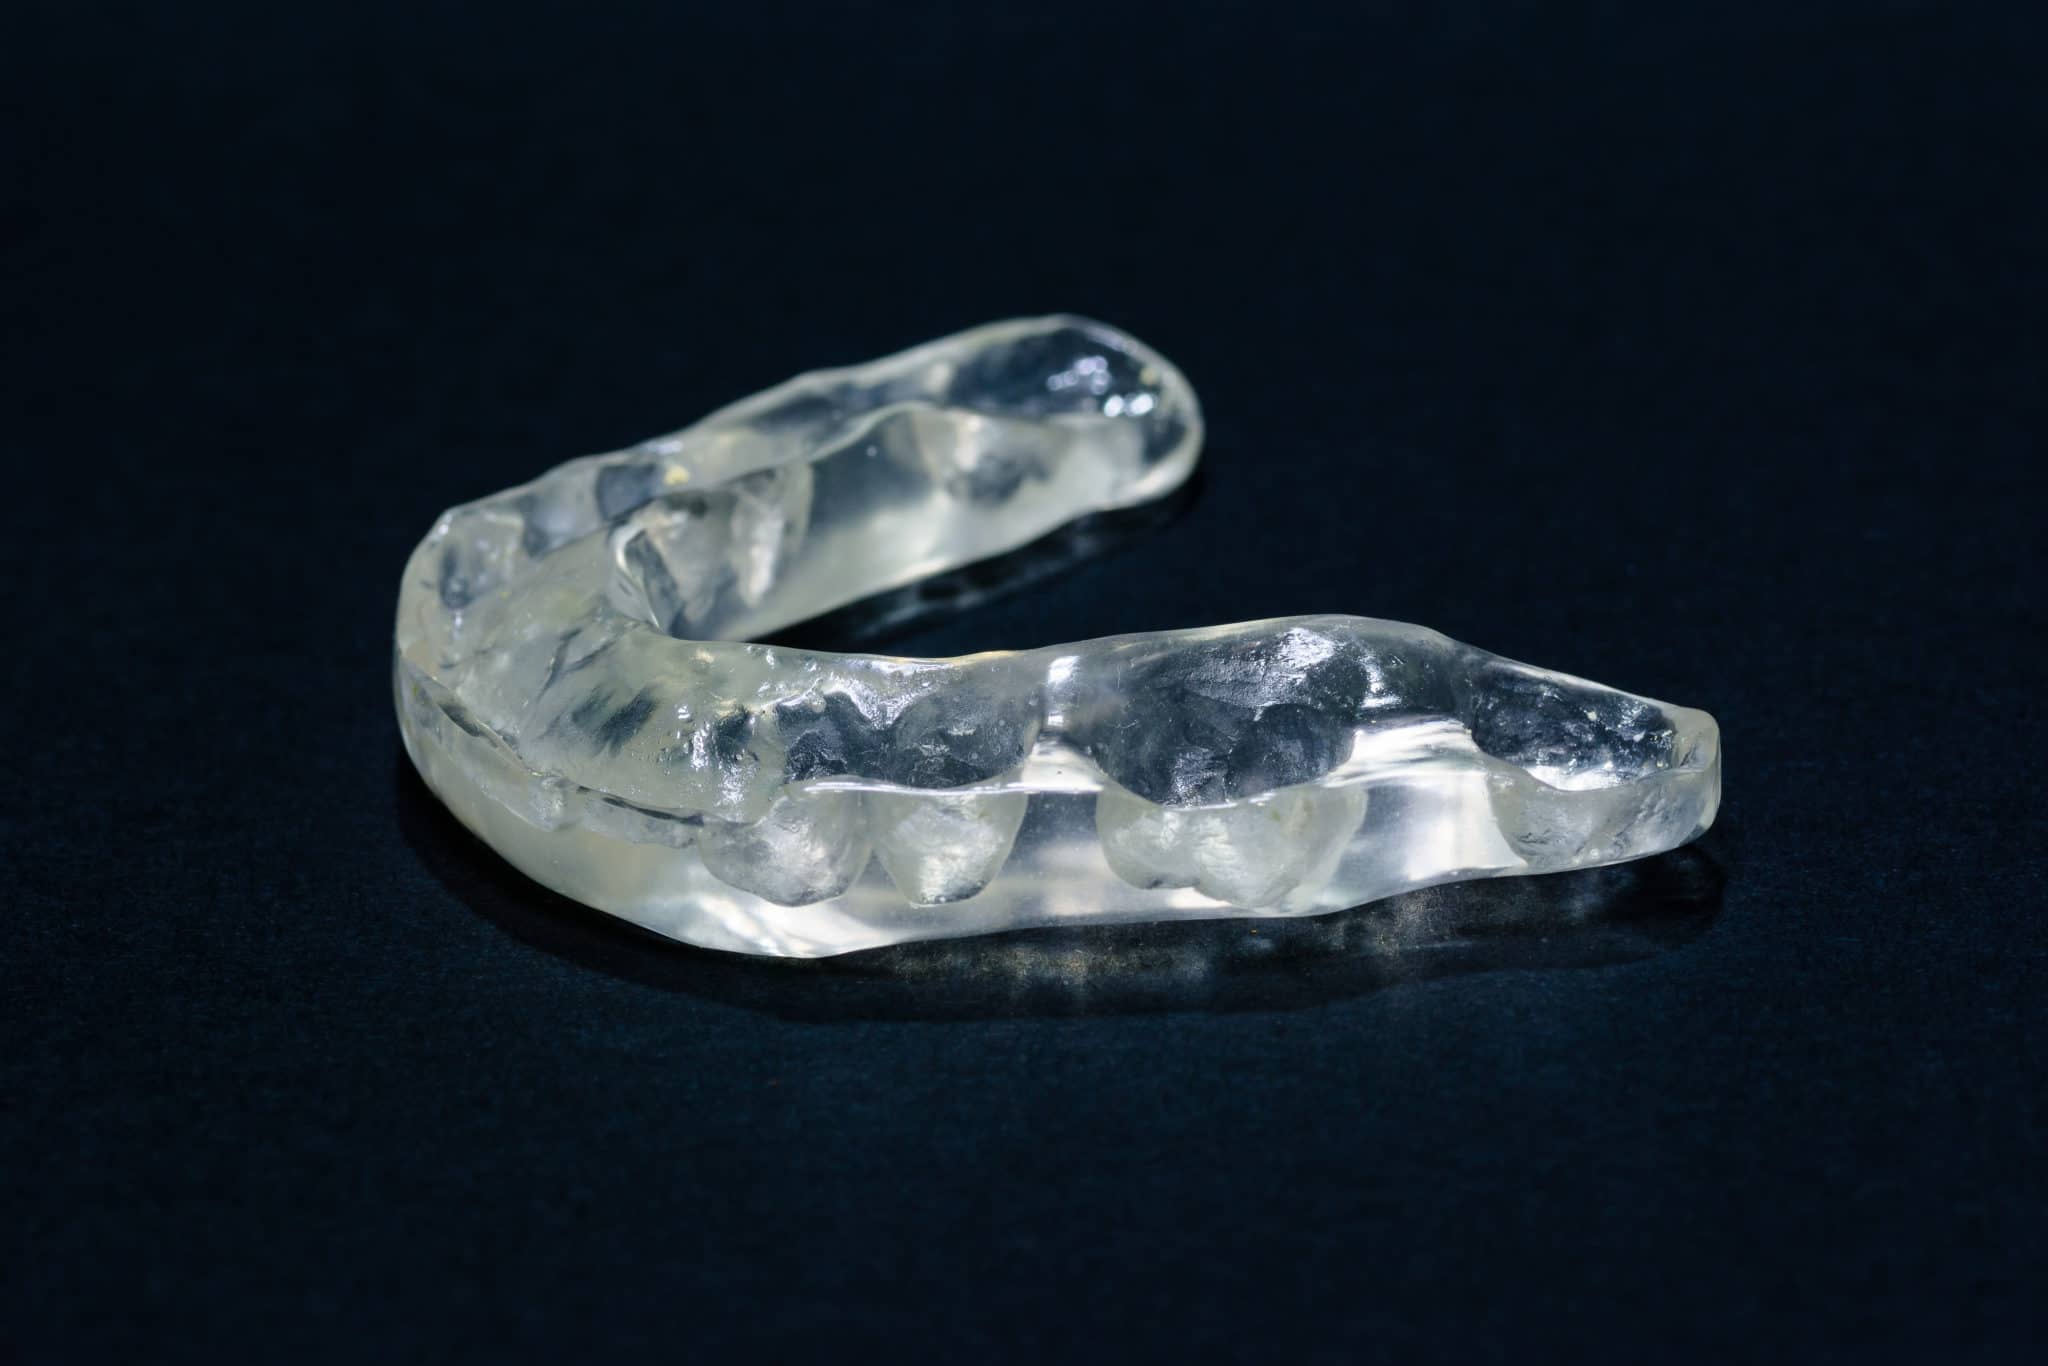 tmj disorder treated by occlusal splint orthotic mouthguard icon